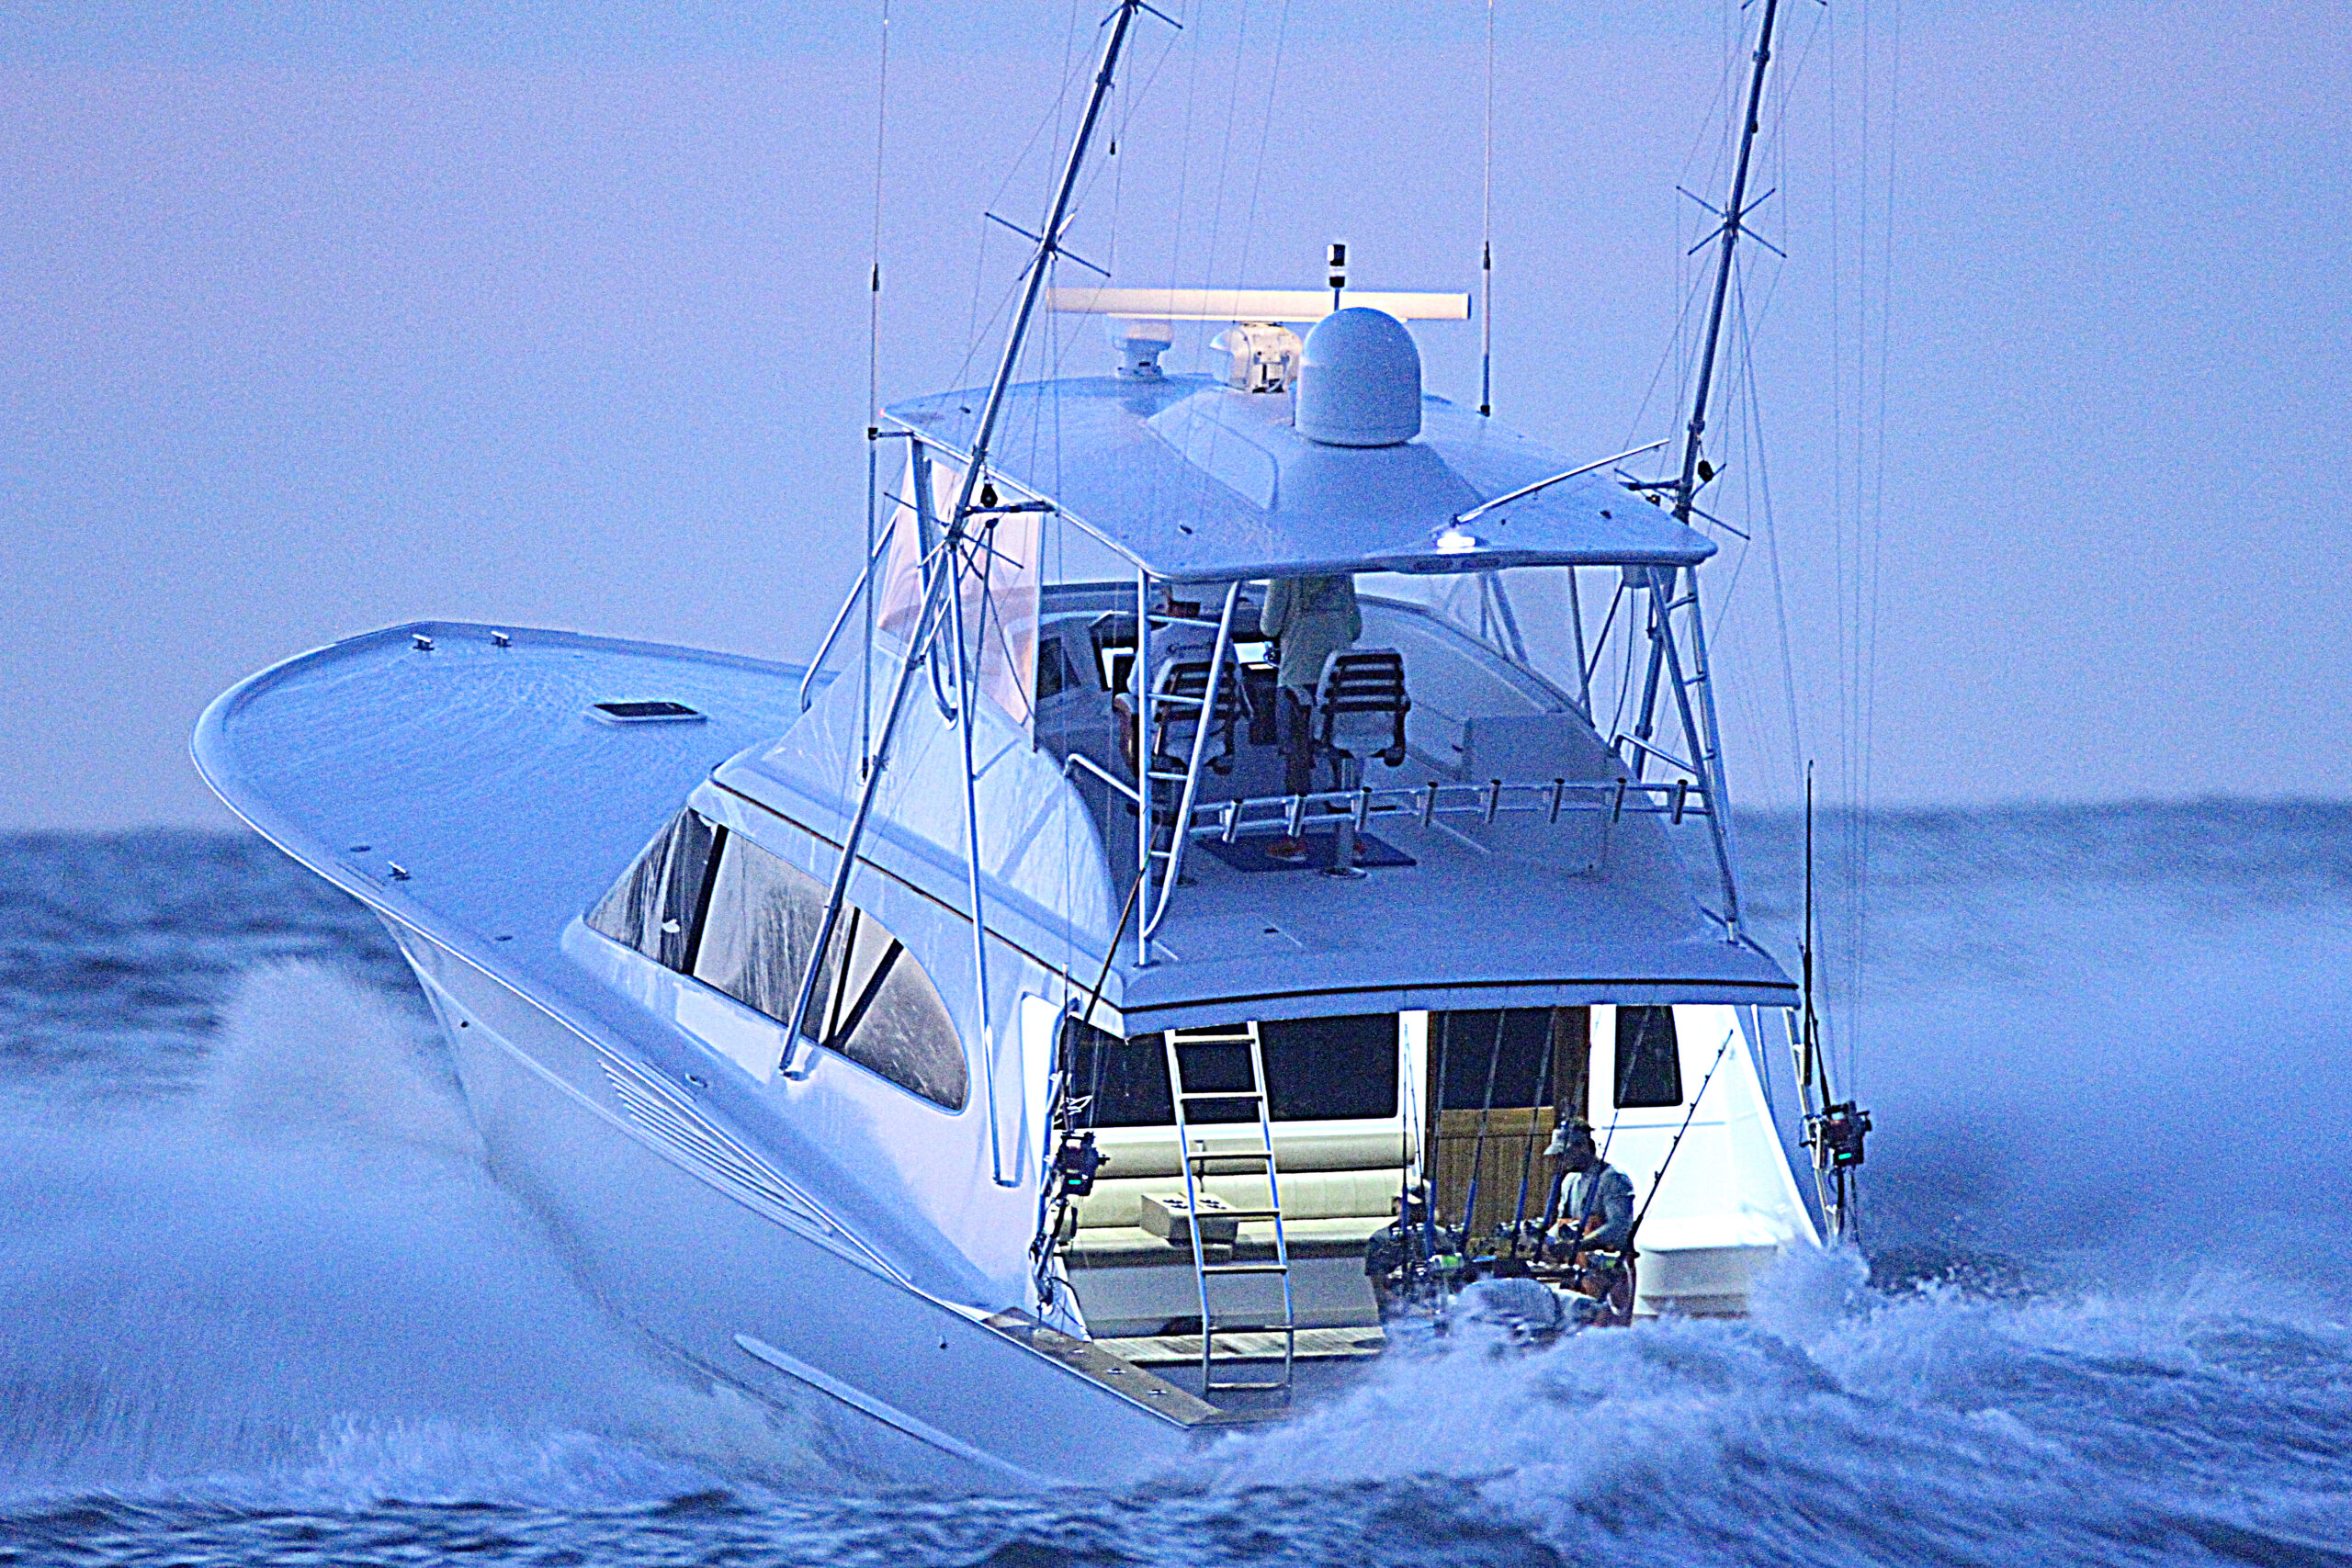 White Marlin Open Joins Sports Fishing Championship Ahead of 50th